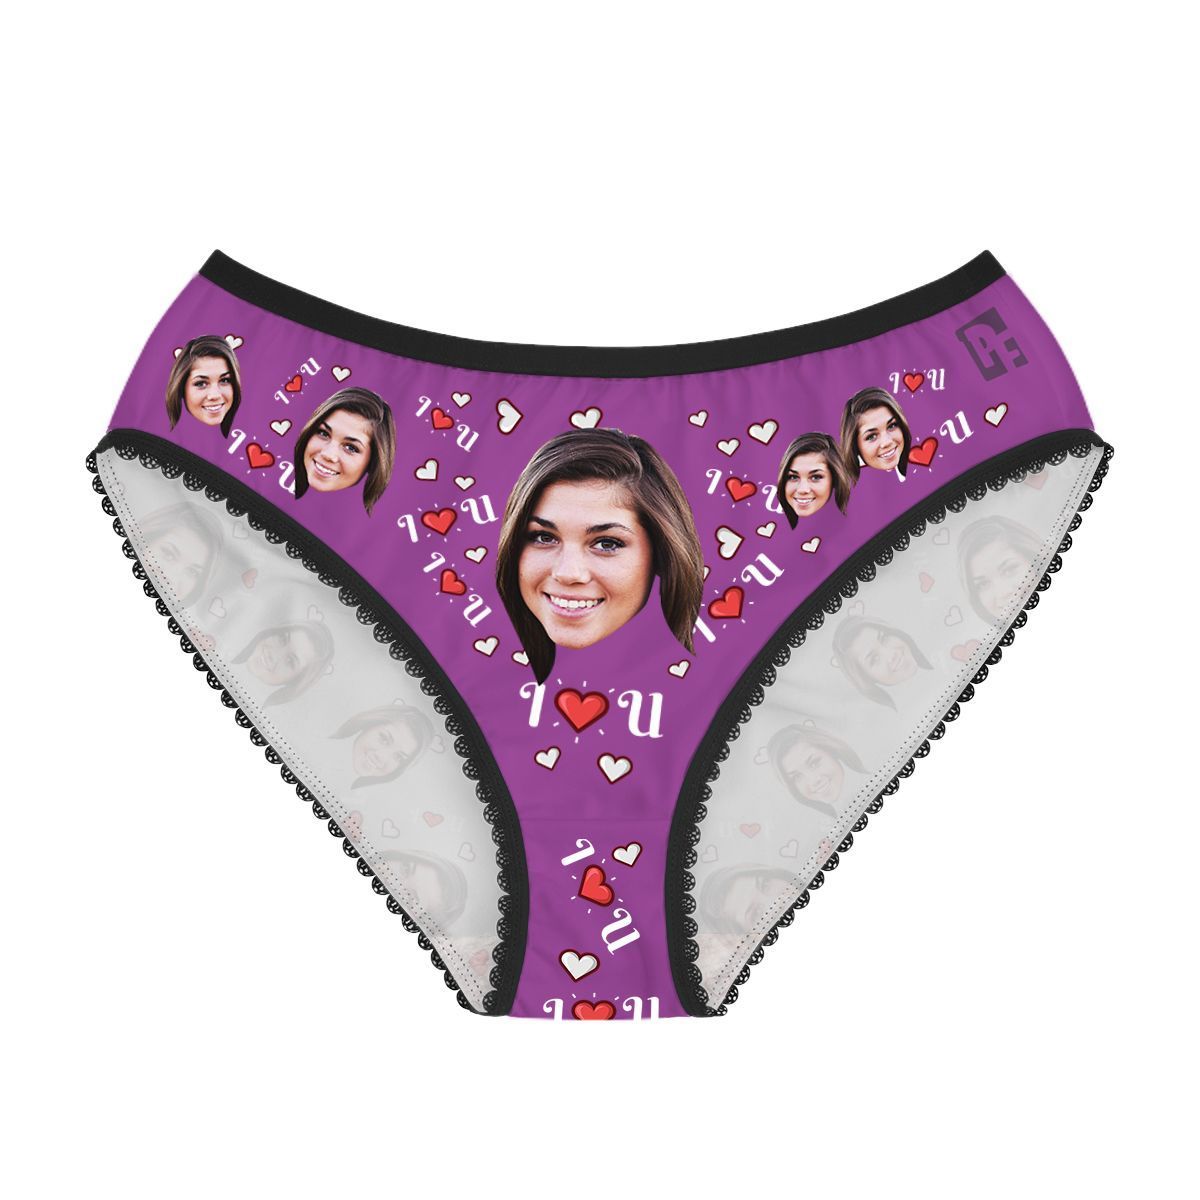 Purple I <3 You women's underwear briefs personalized with photo printed on them